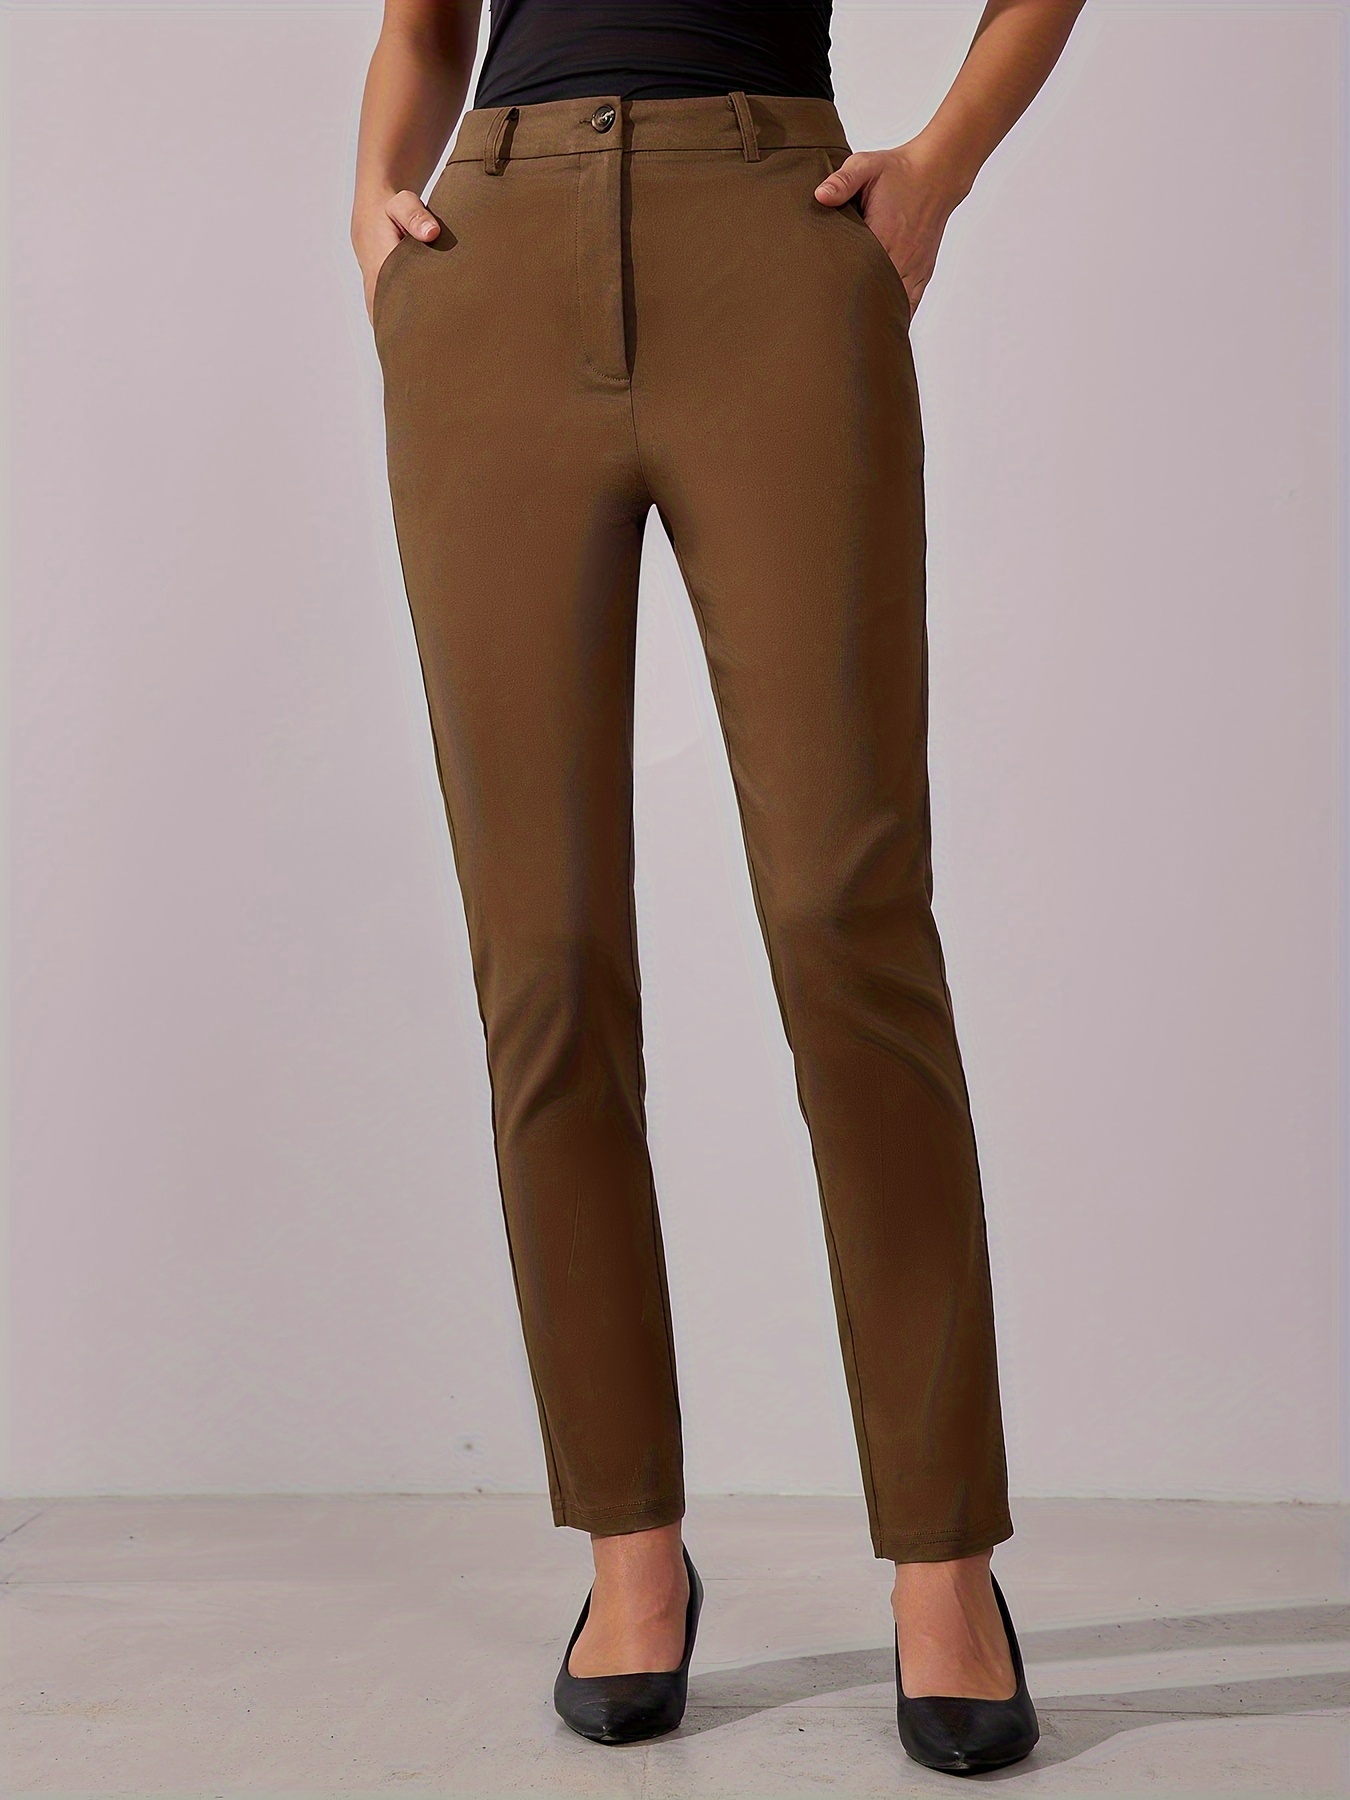 Solid Slant Pockets Tailored Pants  Tailored pants, Pants for women, Tailored  pants women